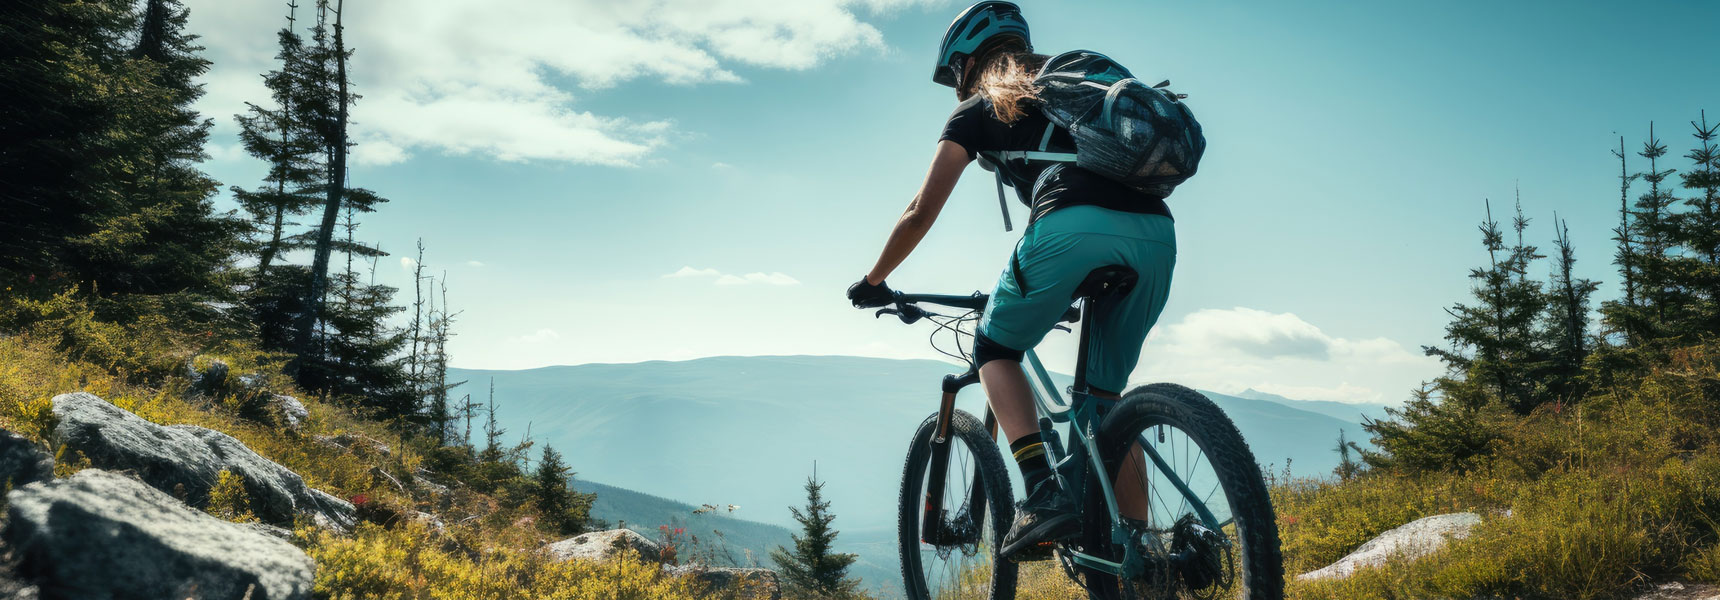 Connectivity is coming to mountain bike trails in the Lake District